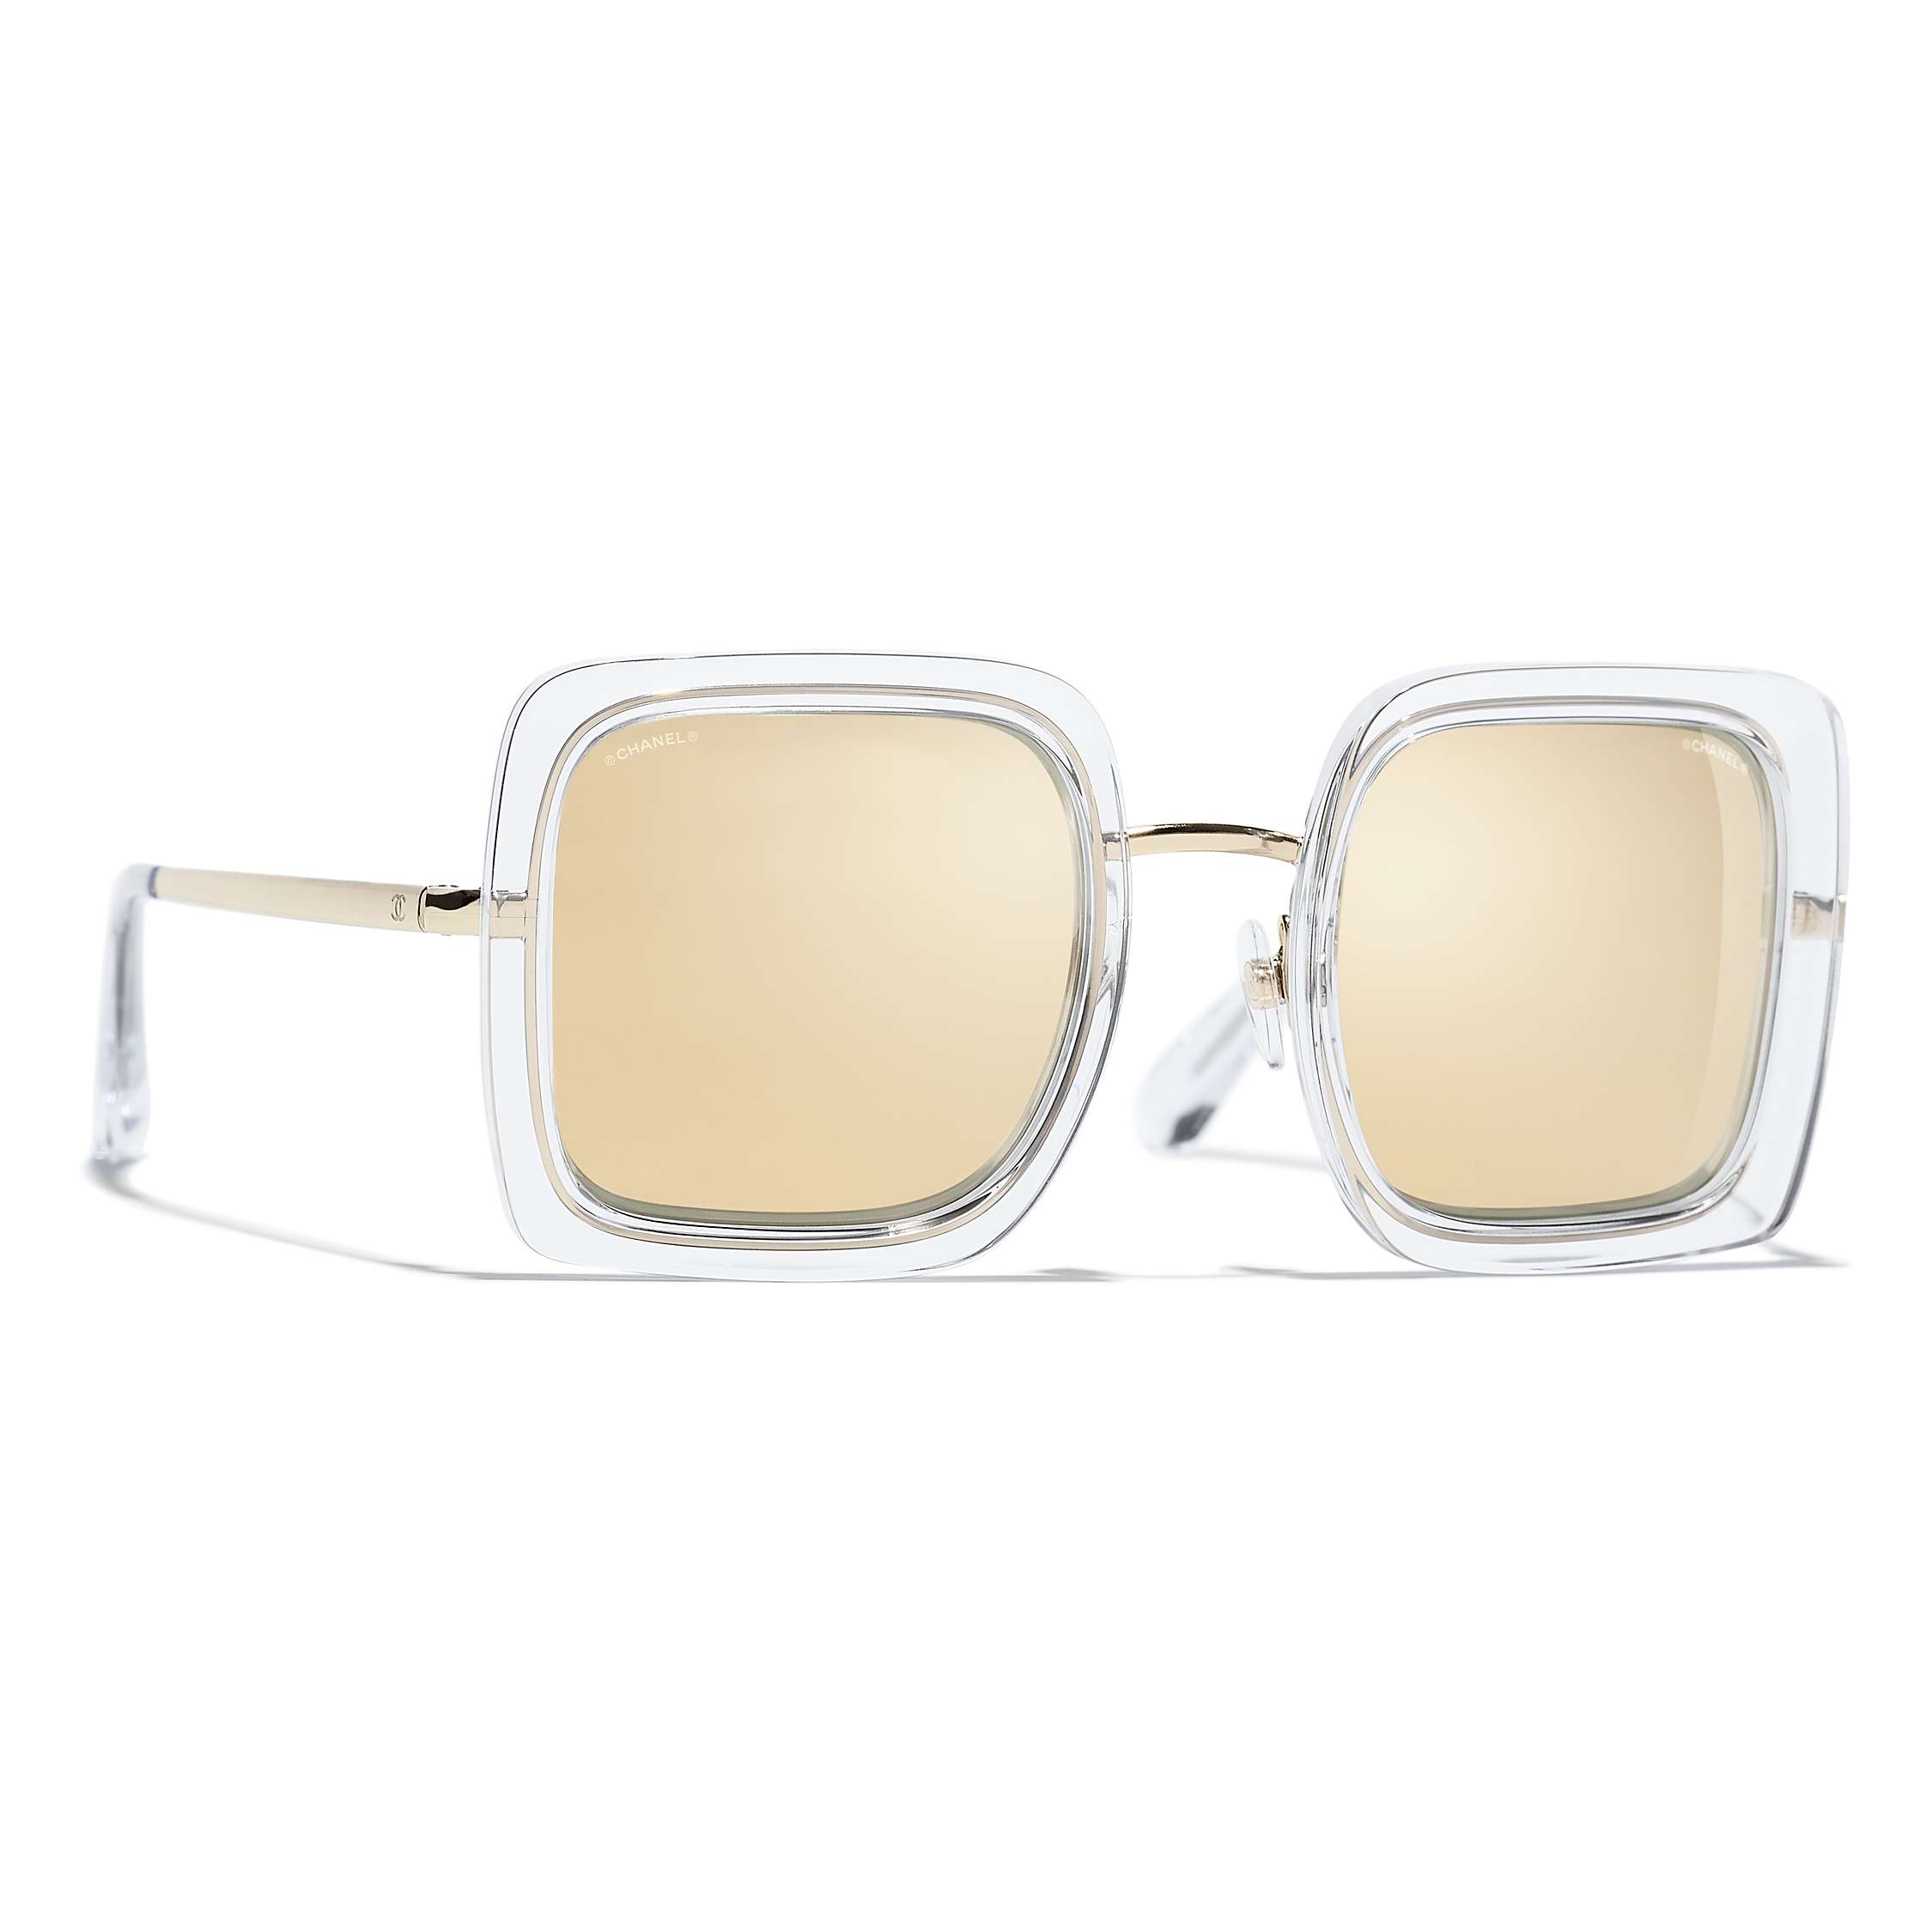 Buy CHANEL Square Sunglasses CH4240 Clear/Mirror Gold Online at johnlewis.com